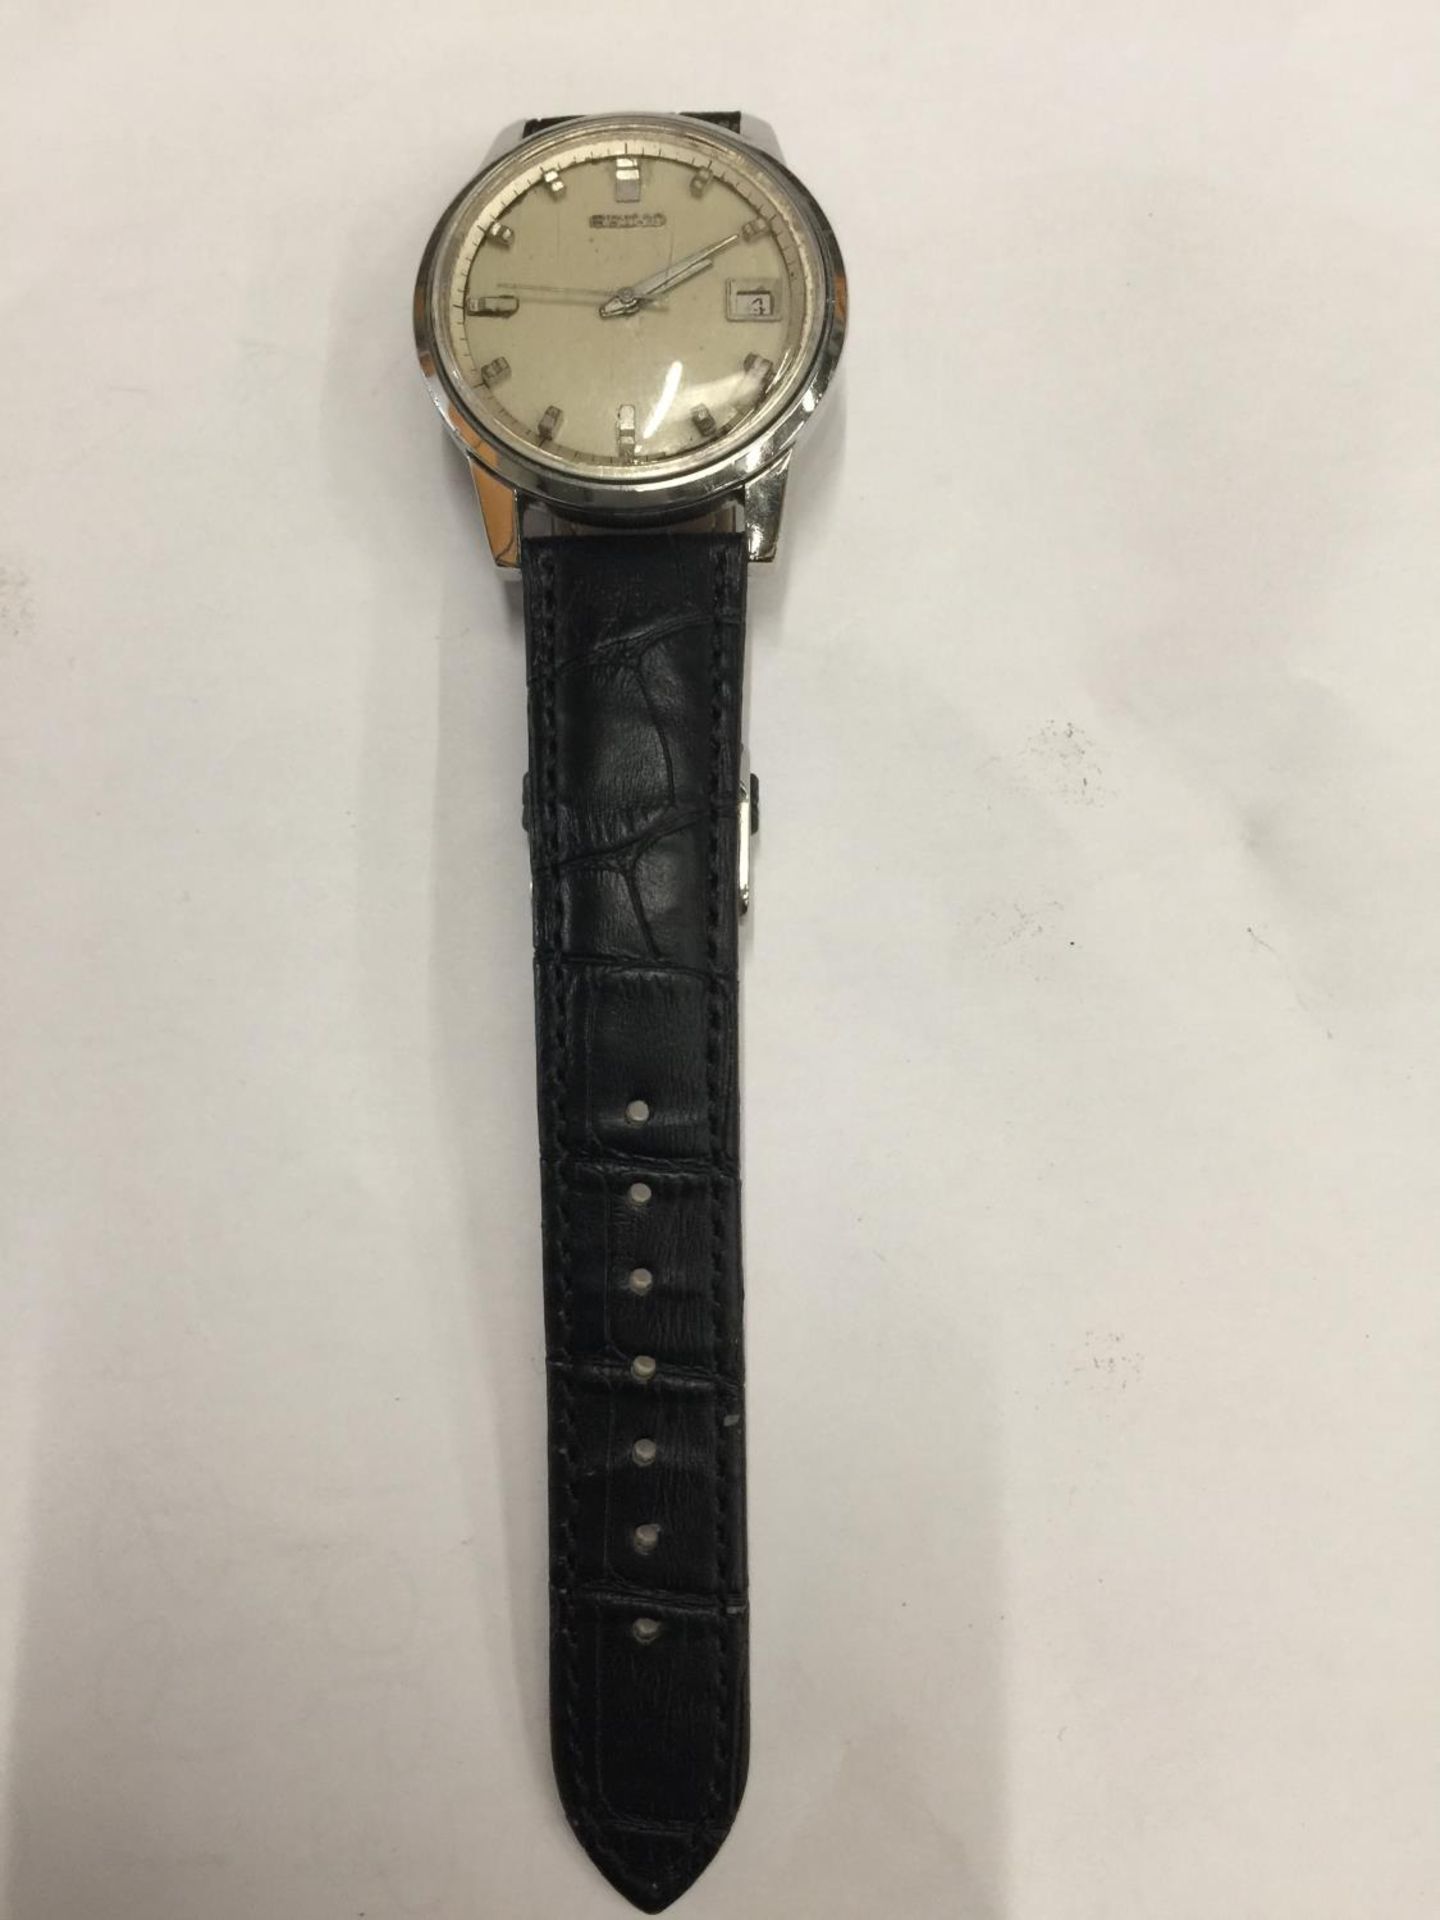 A VINTAGE SEIKO SPORTSMATIC AUTOMATIC WRISTWATCH 7625-8060 SEEN WORKING BUT NO WARRANTY